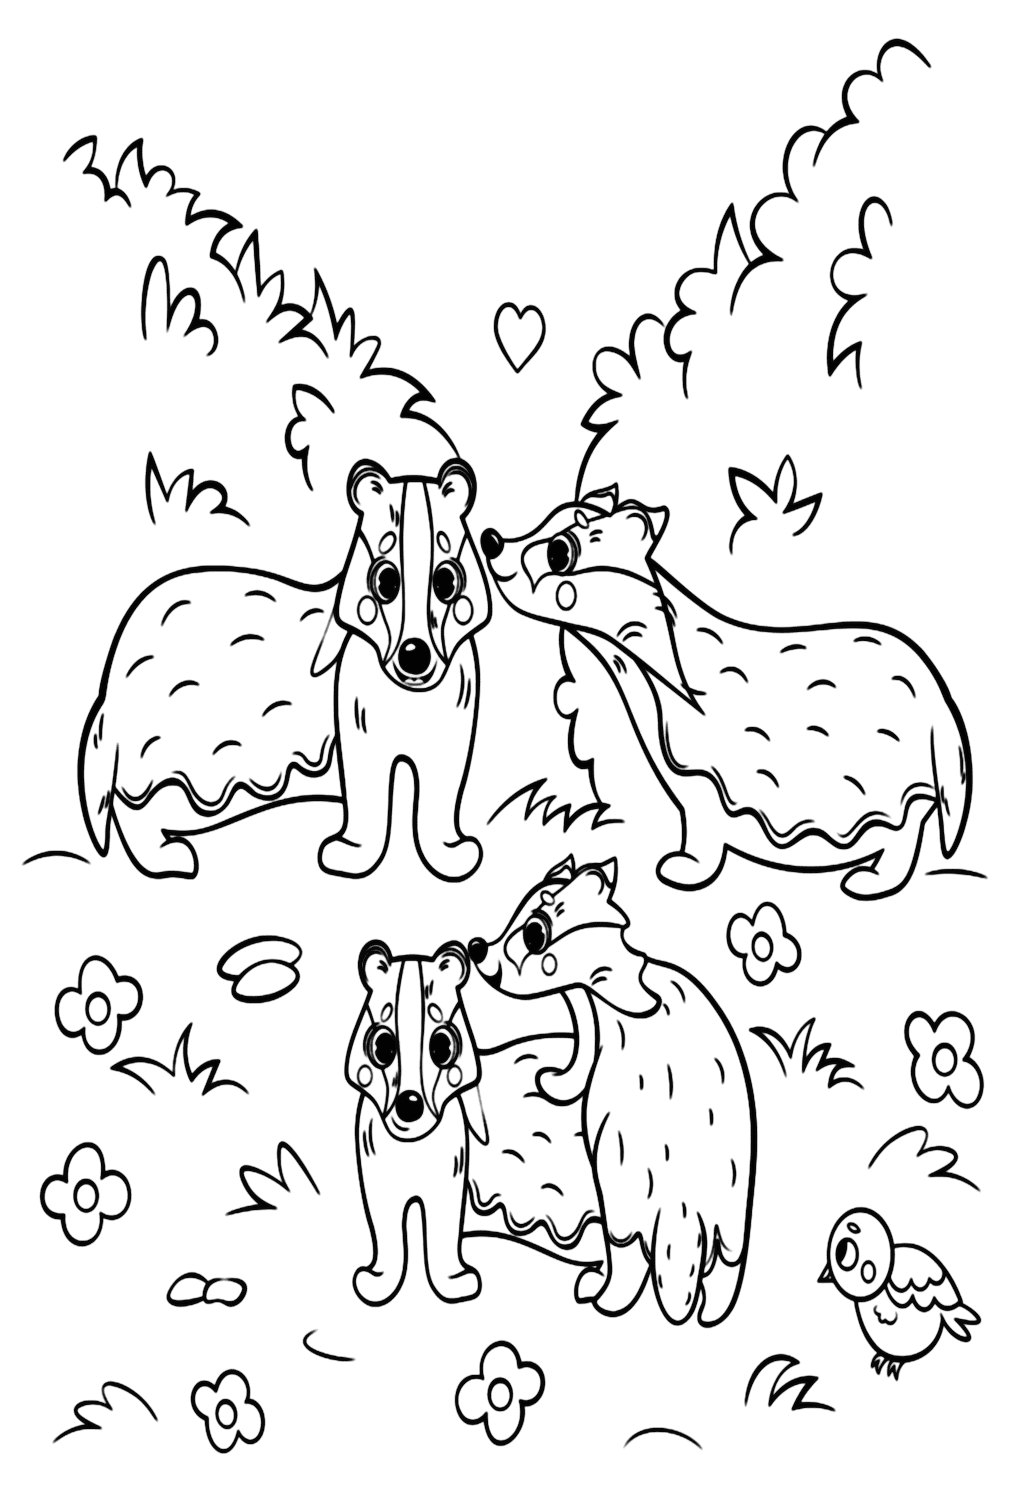 Badger Family Coloring Page from Badger